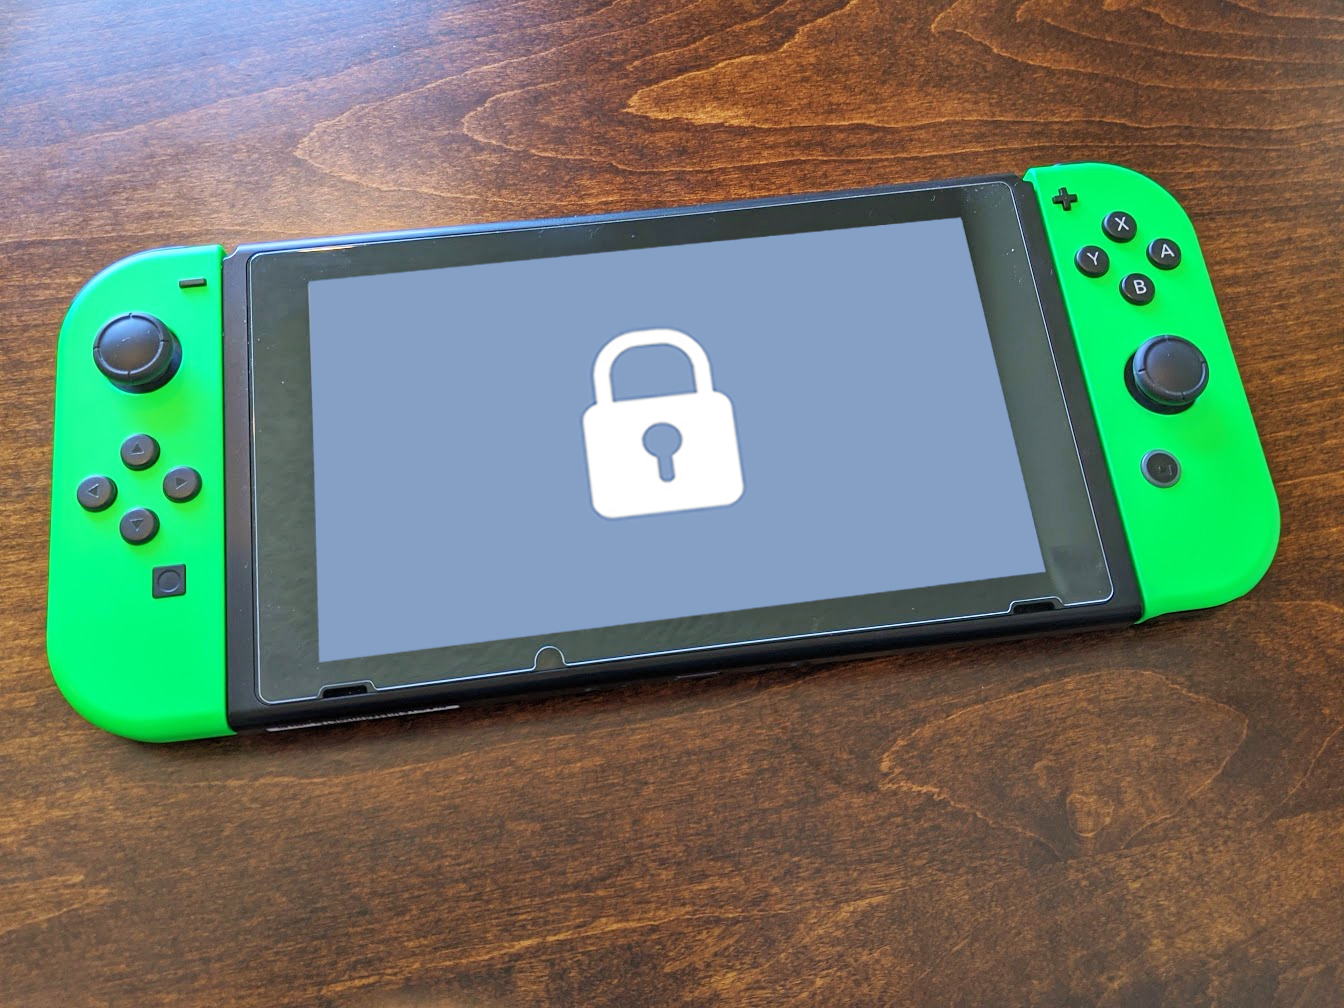 How to Set up Two-Factor Authentication for Your Nintendo Account